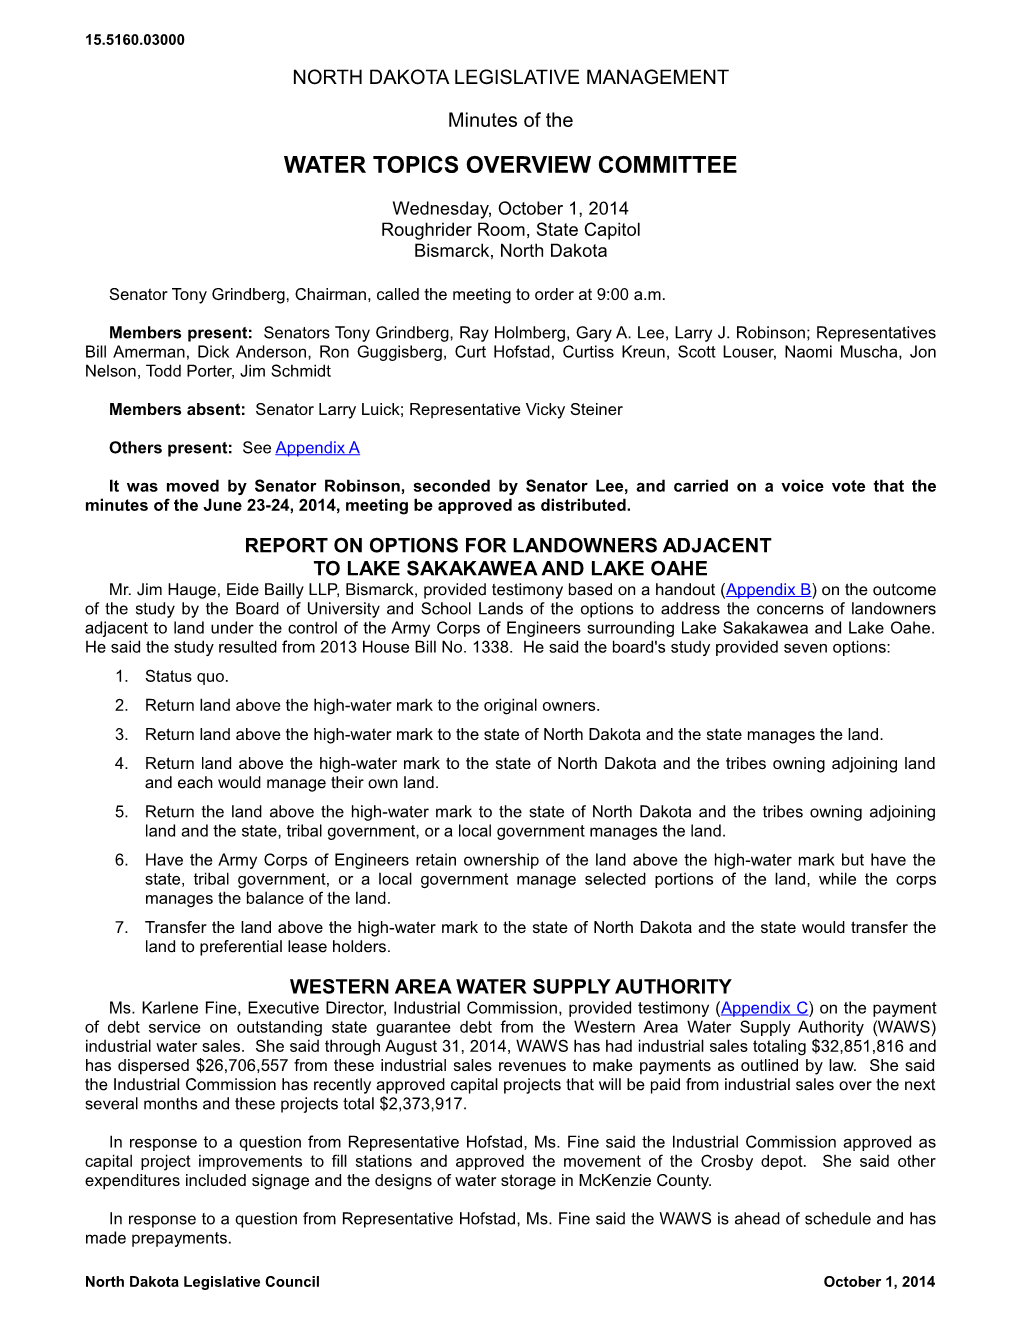 Water Topics Overview Committee